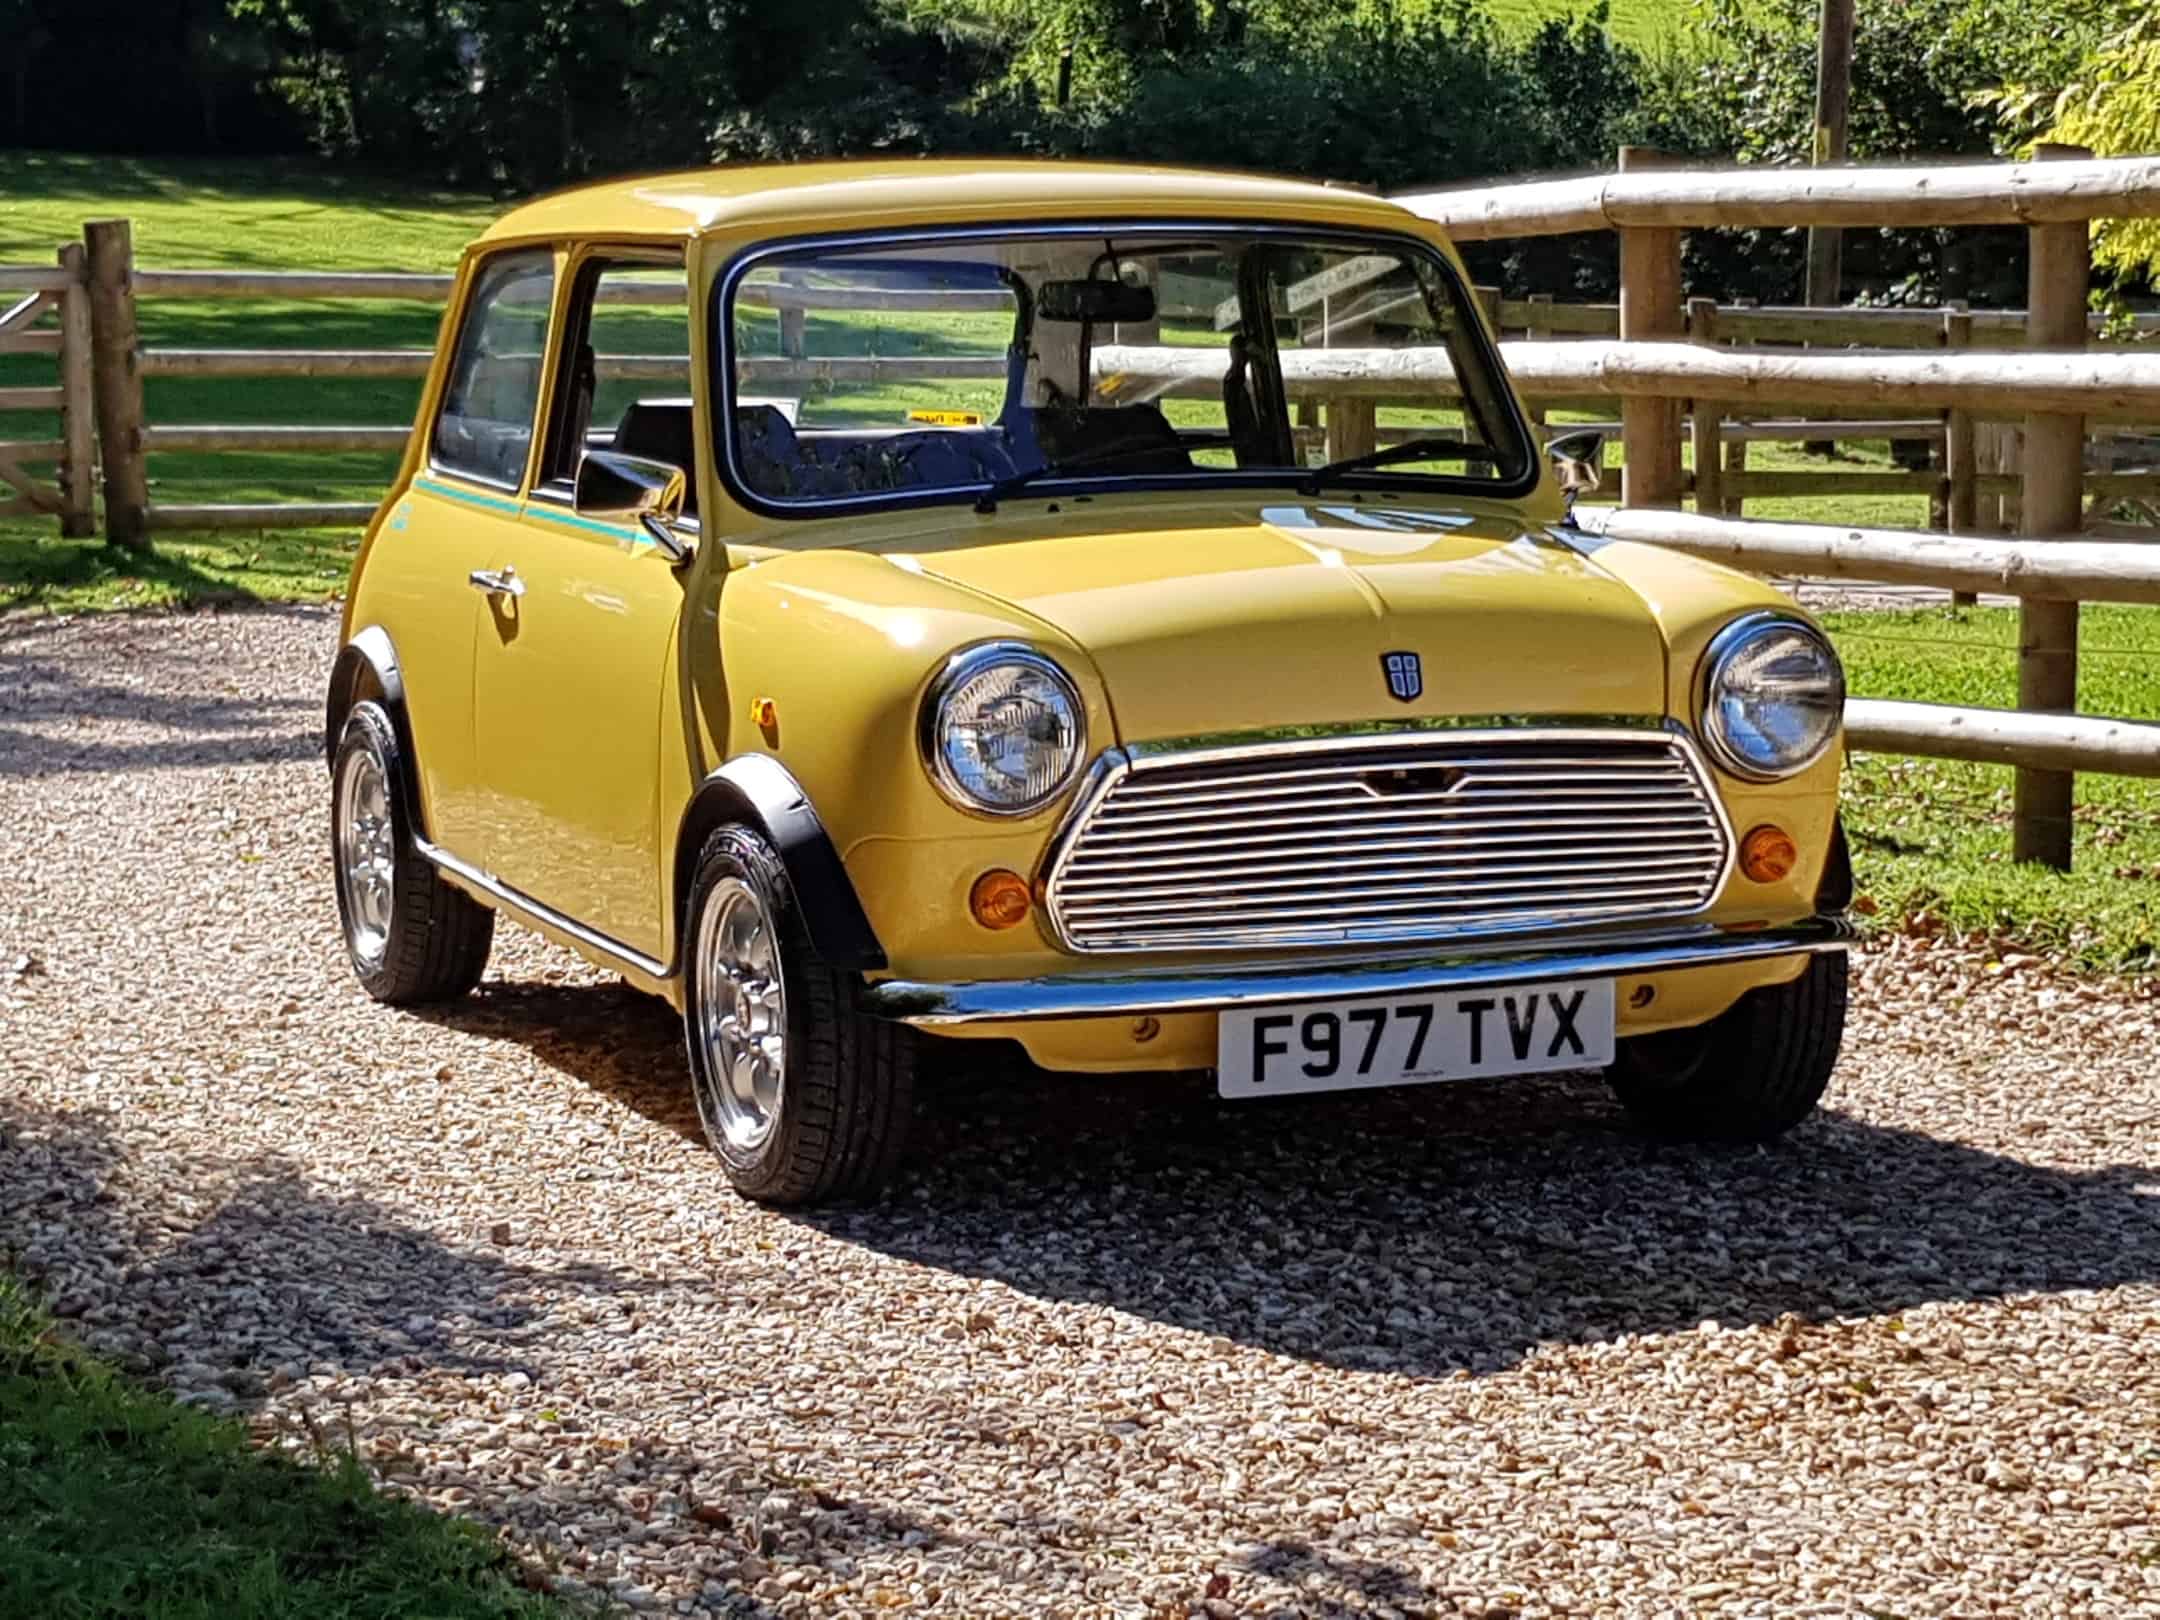 ** NOW SOLD ** Amazing Austin Mini City On Just 16500 Miles From New!!